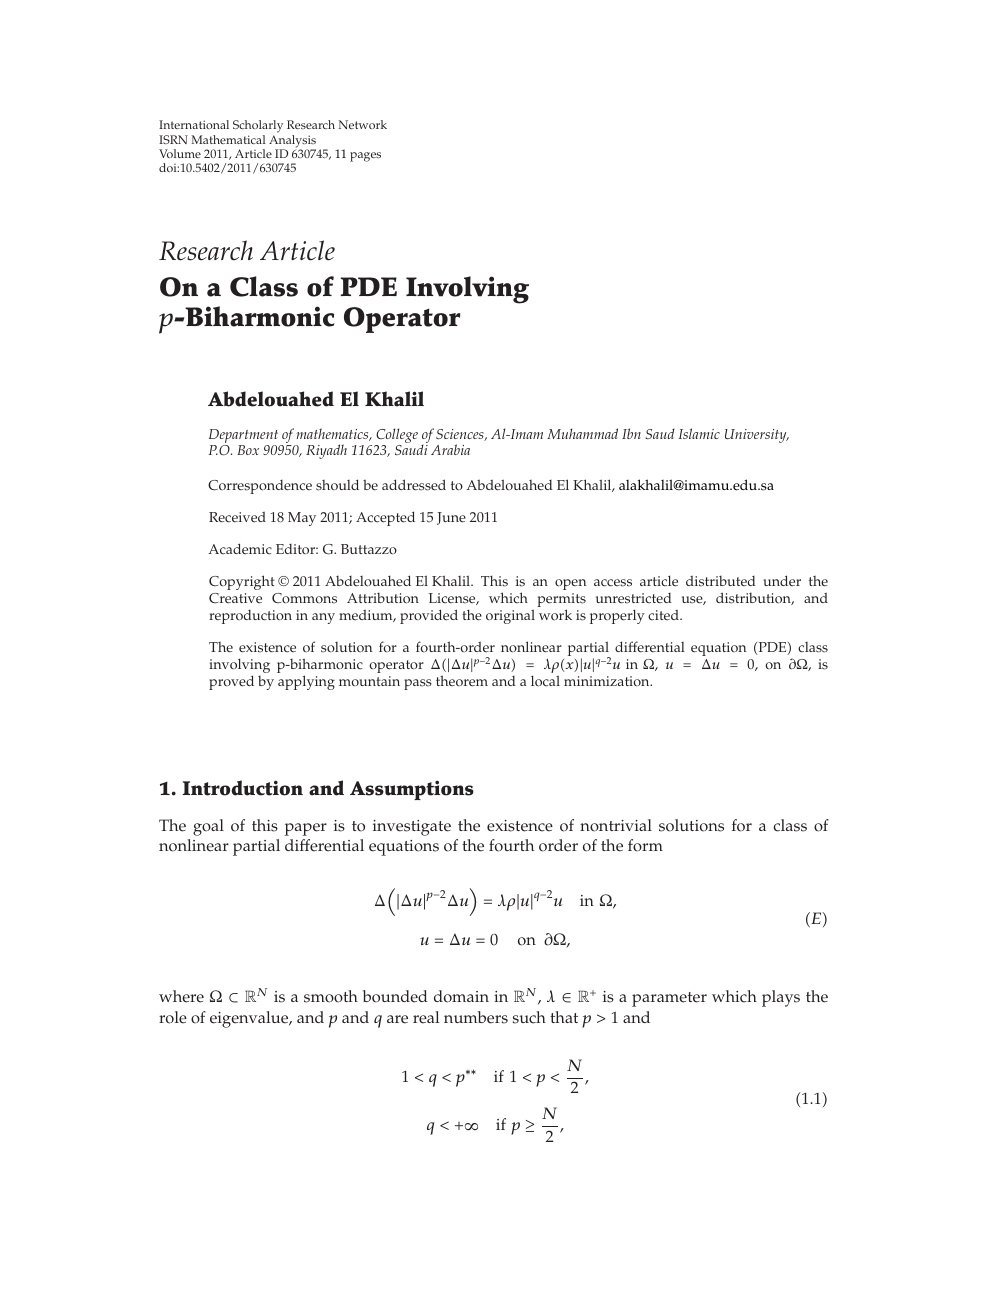 On A Class Of Pde Involving P Biharmonic Operator Topic Of Research Paper In Mathematics Download Scholarly Article Pdf And Read For Free On Cyberleninka Open Science Hub